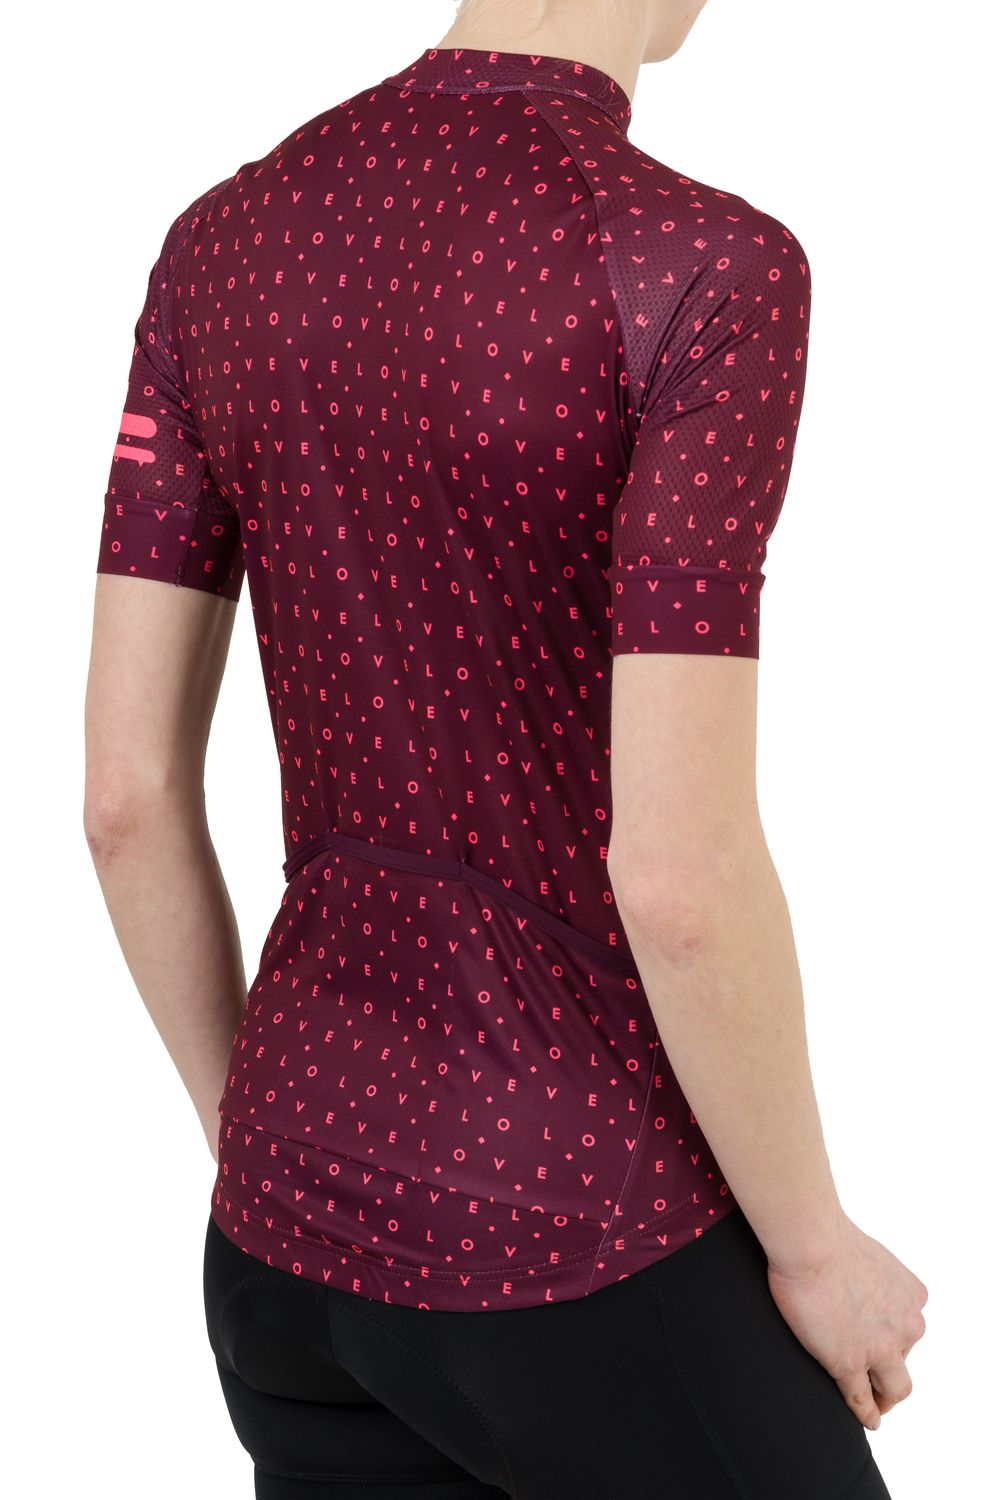 Velo Love Jersey SS Essential Women fit example